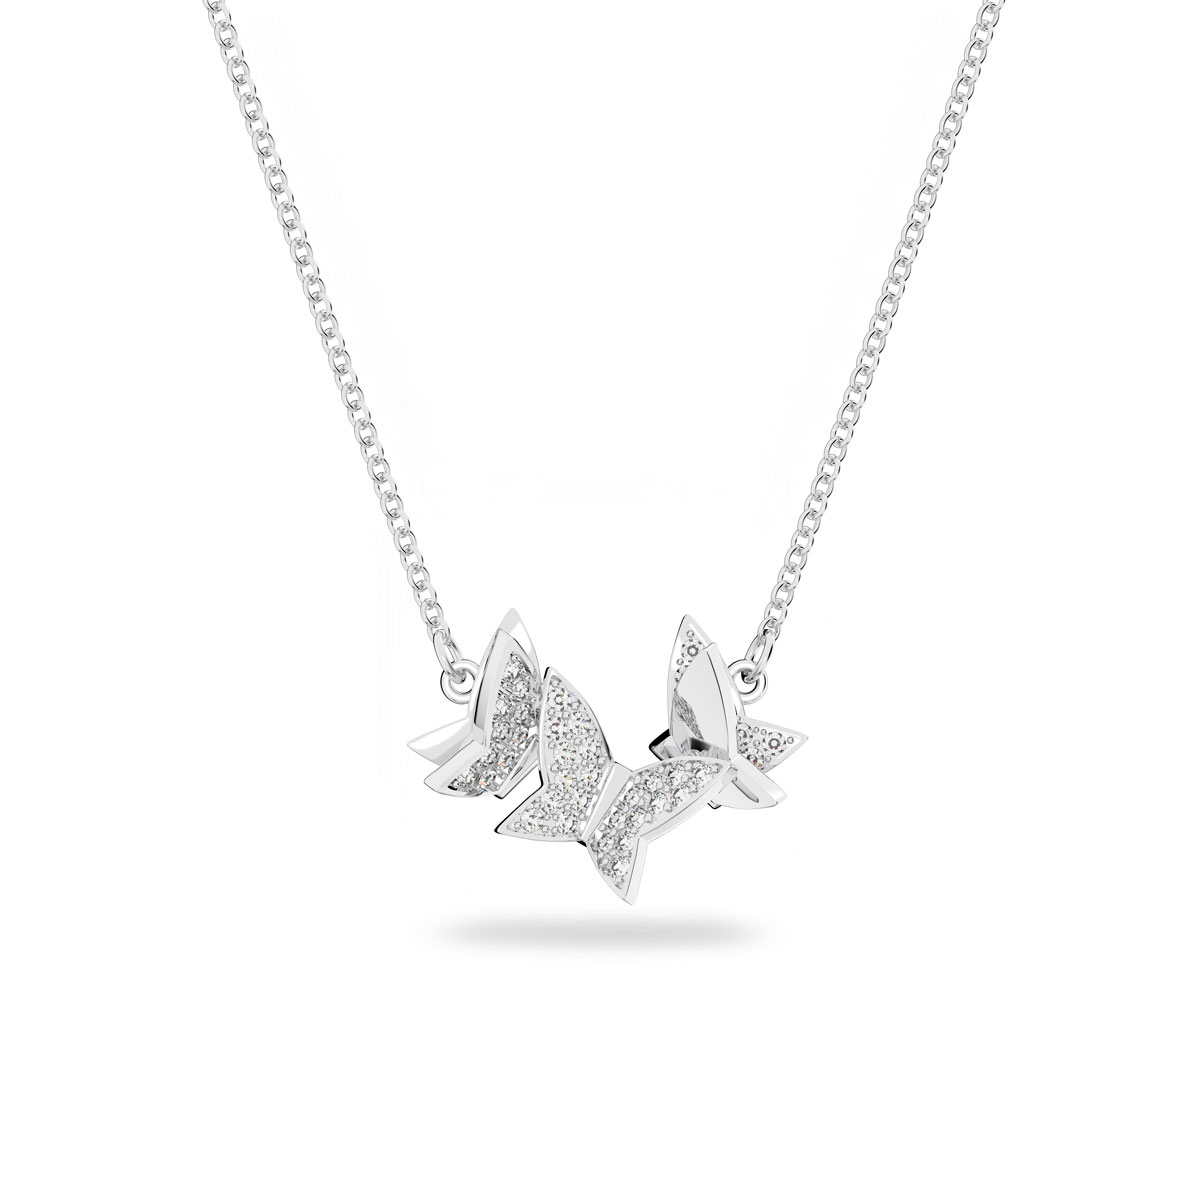 Swarovski Crystal Brilliant Butterflies Collection | Crystal Classics